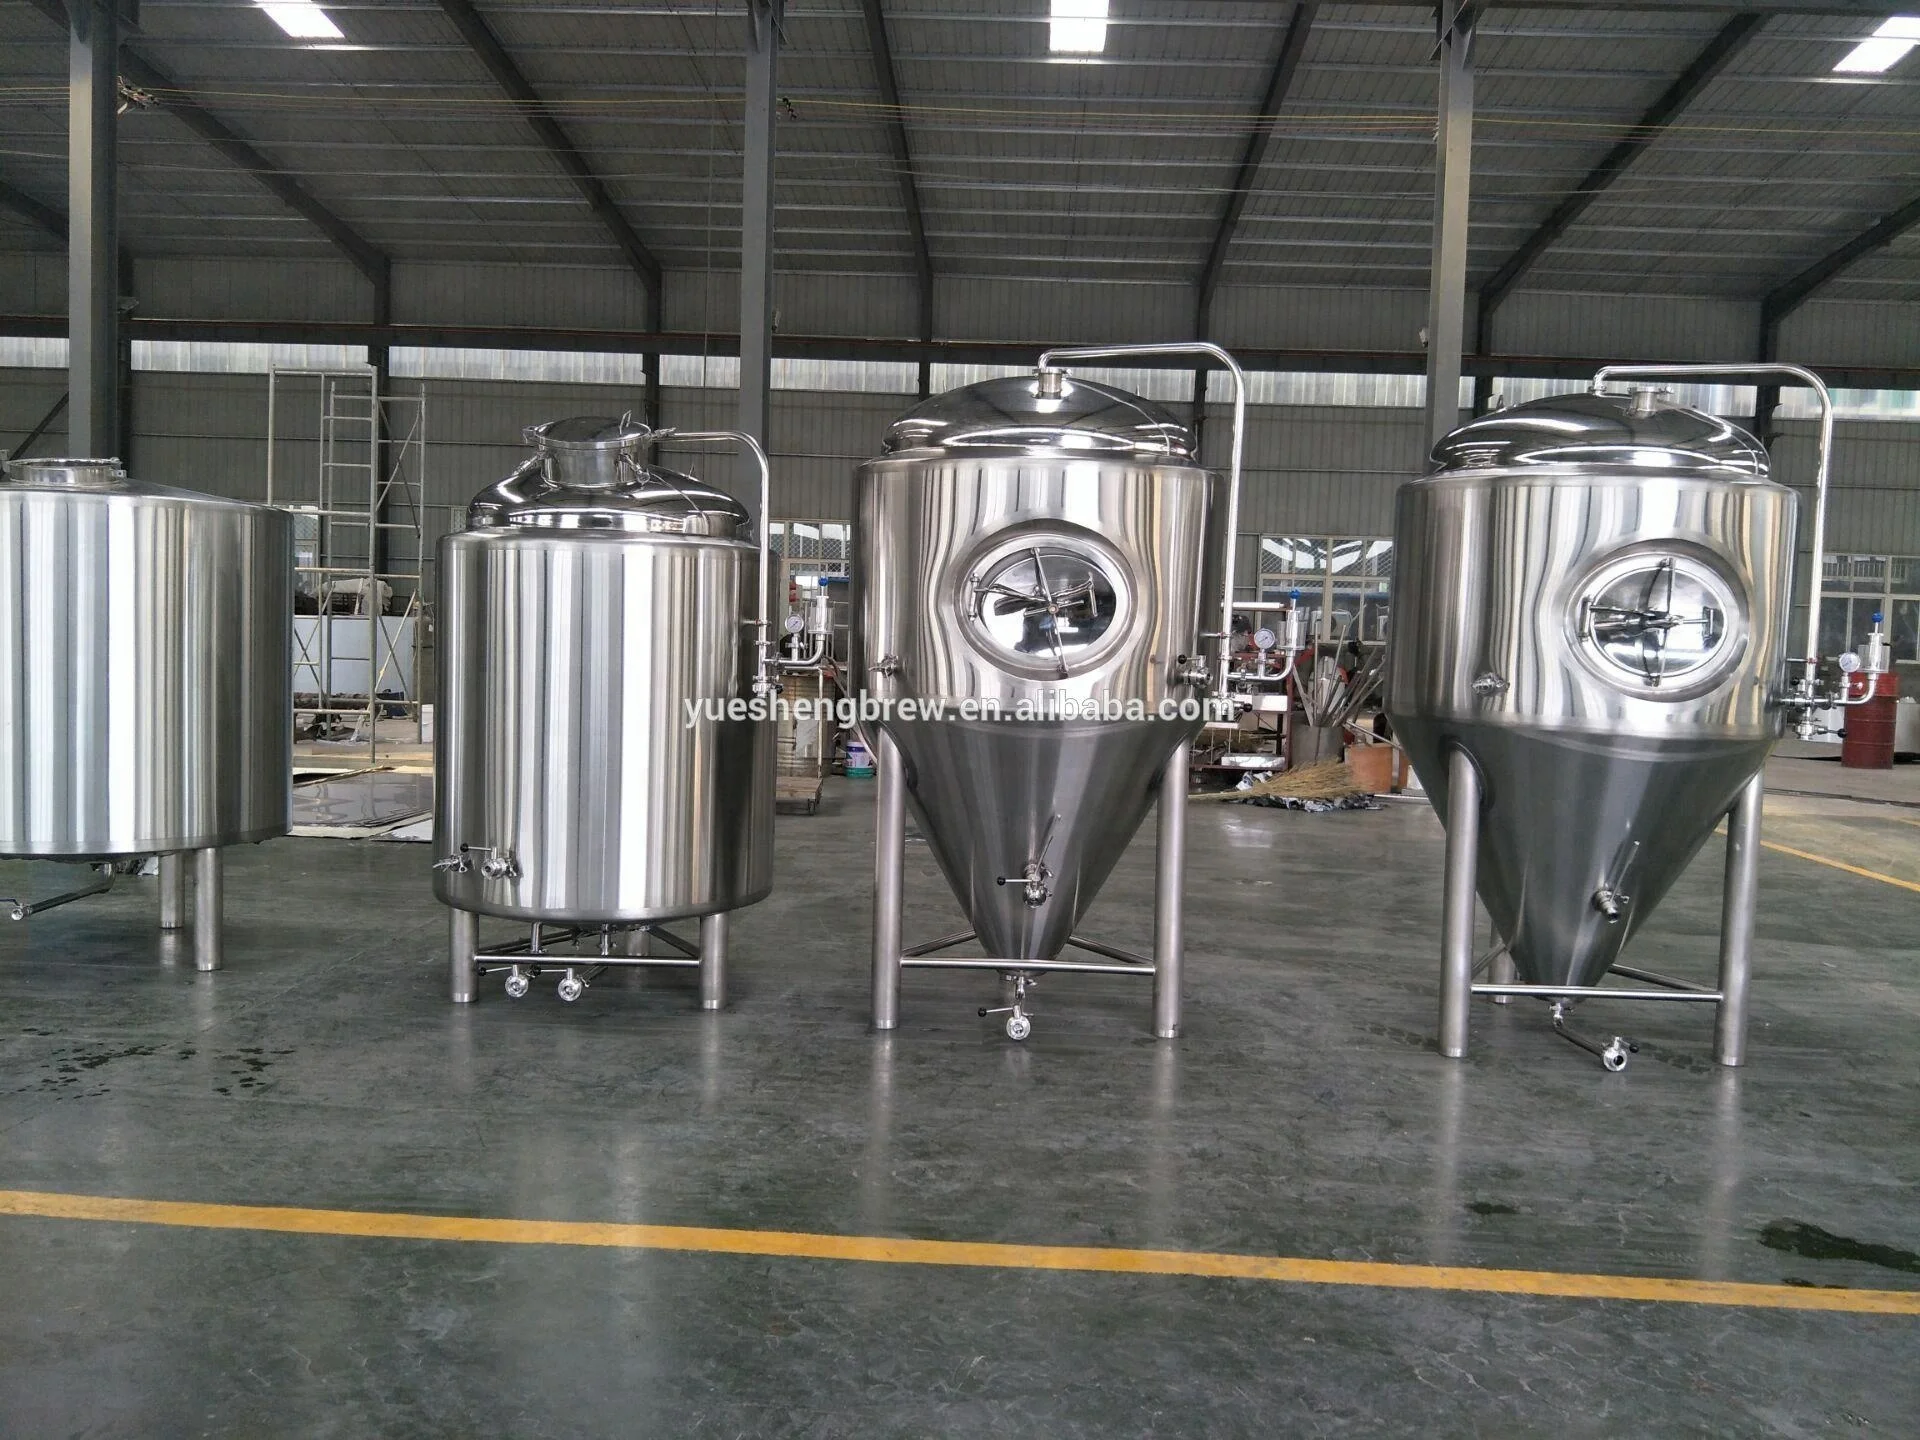 1000L restaurant stainless steel beer brewing equipment for sale